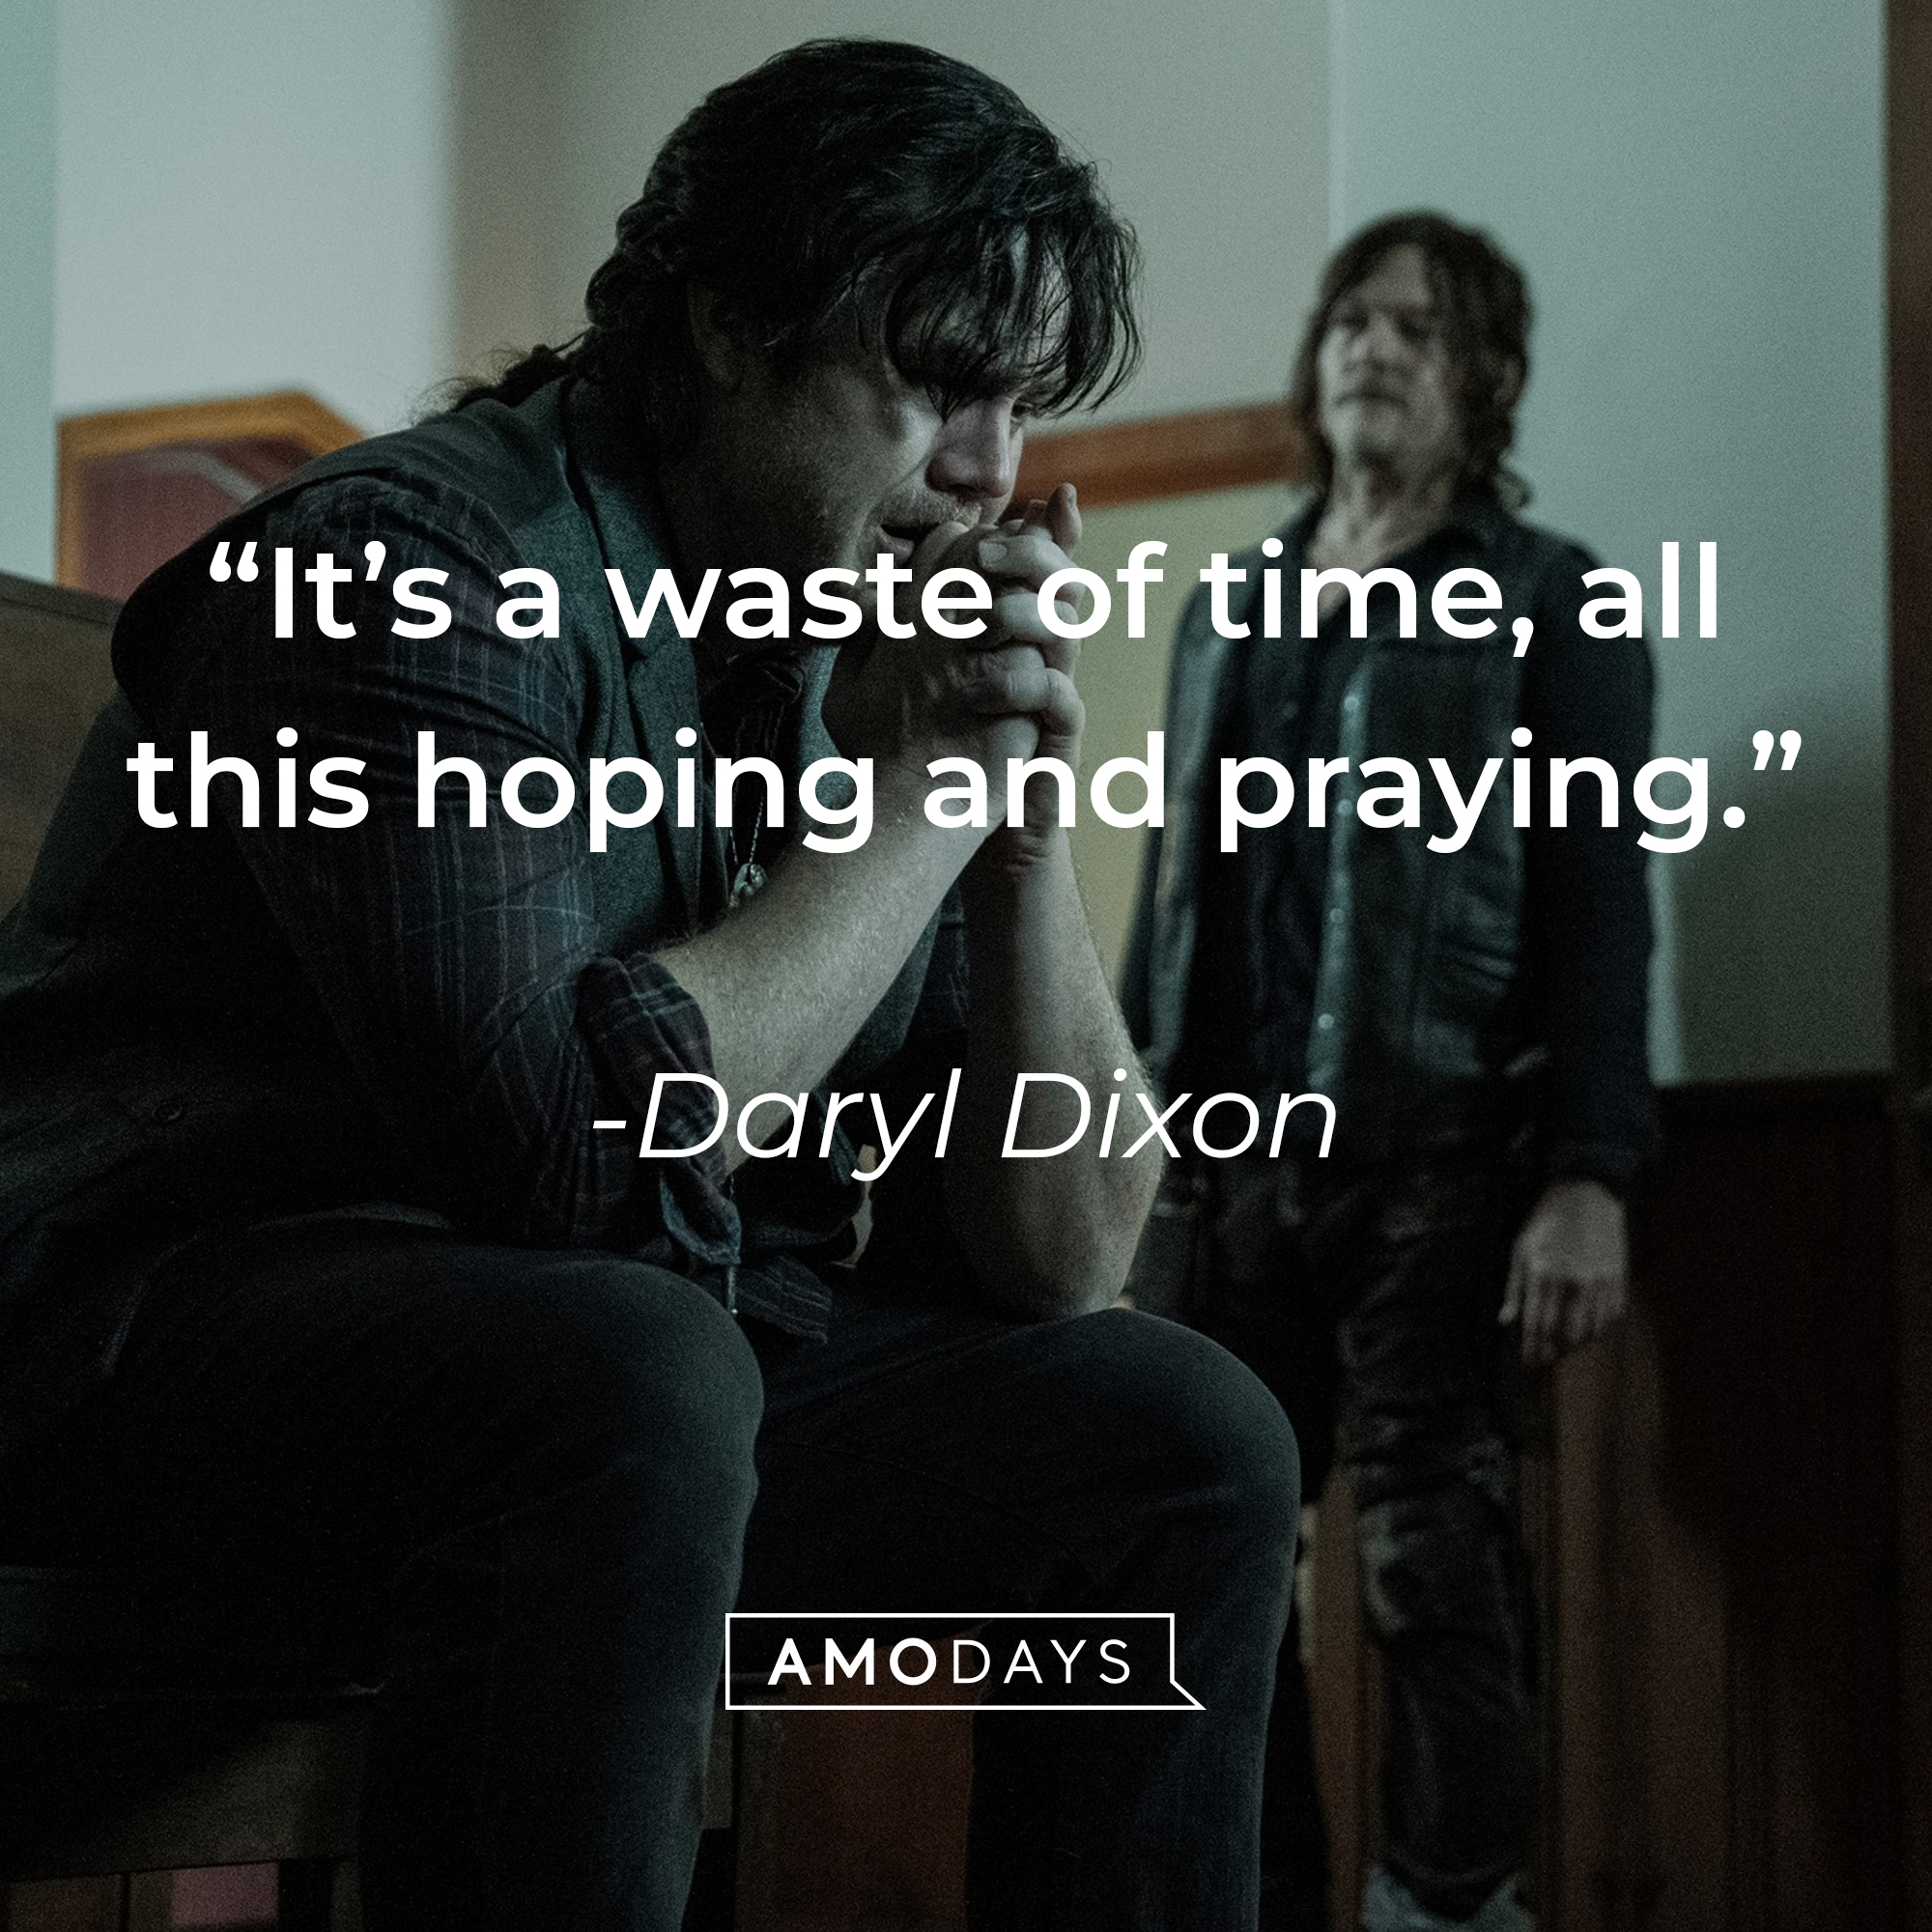 An image of Daryl Dixon with his quote: “It’s a waste of time, all this hoping and praying.” | Source: facebook.com/TheWalkingDeadAMC